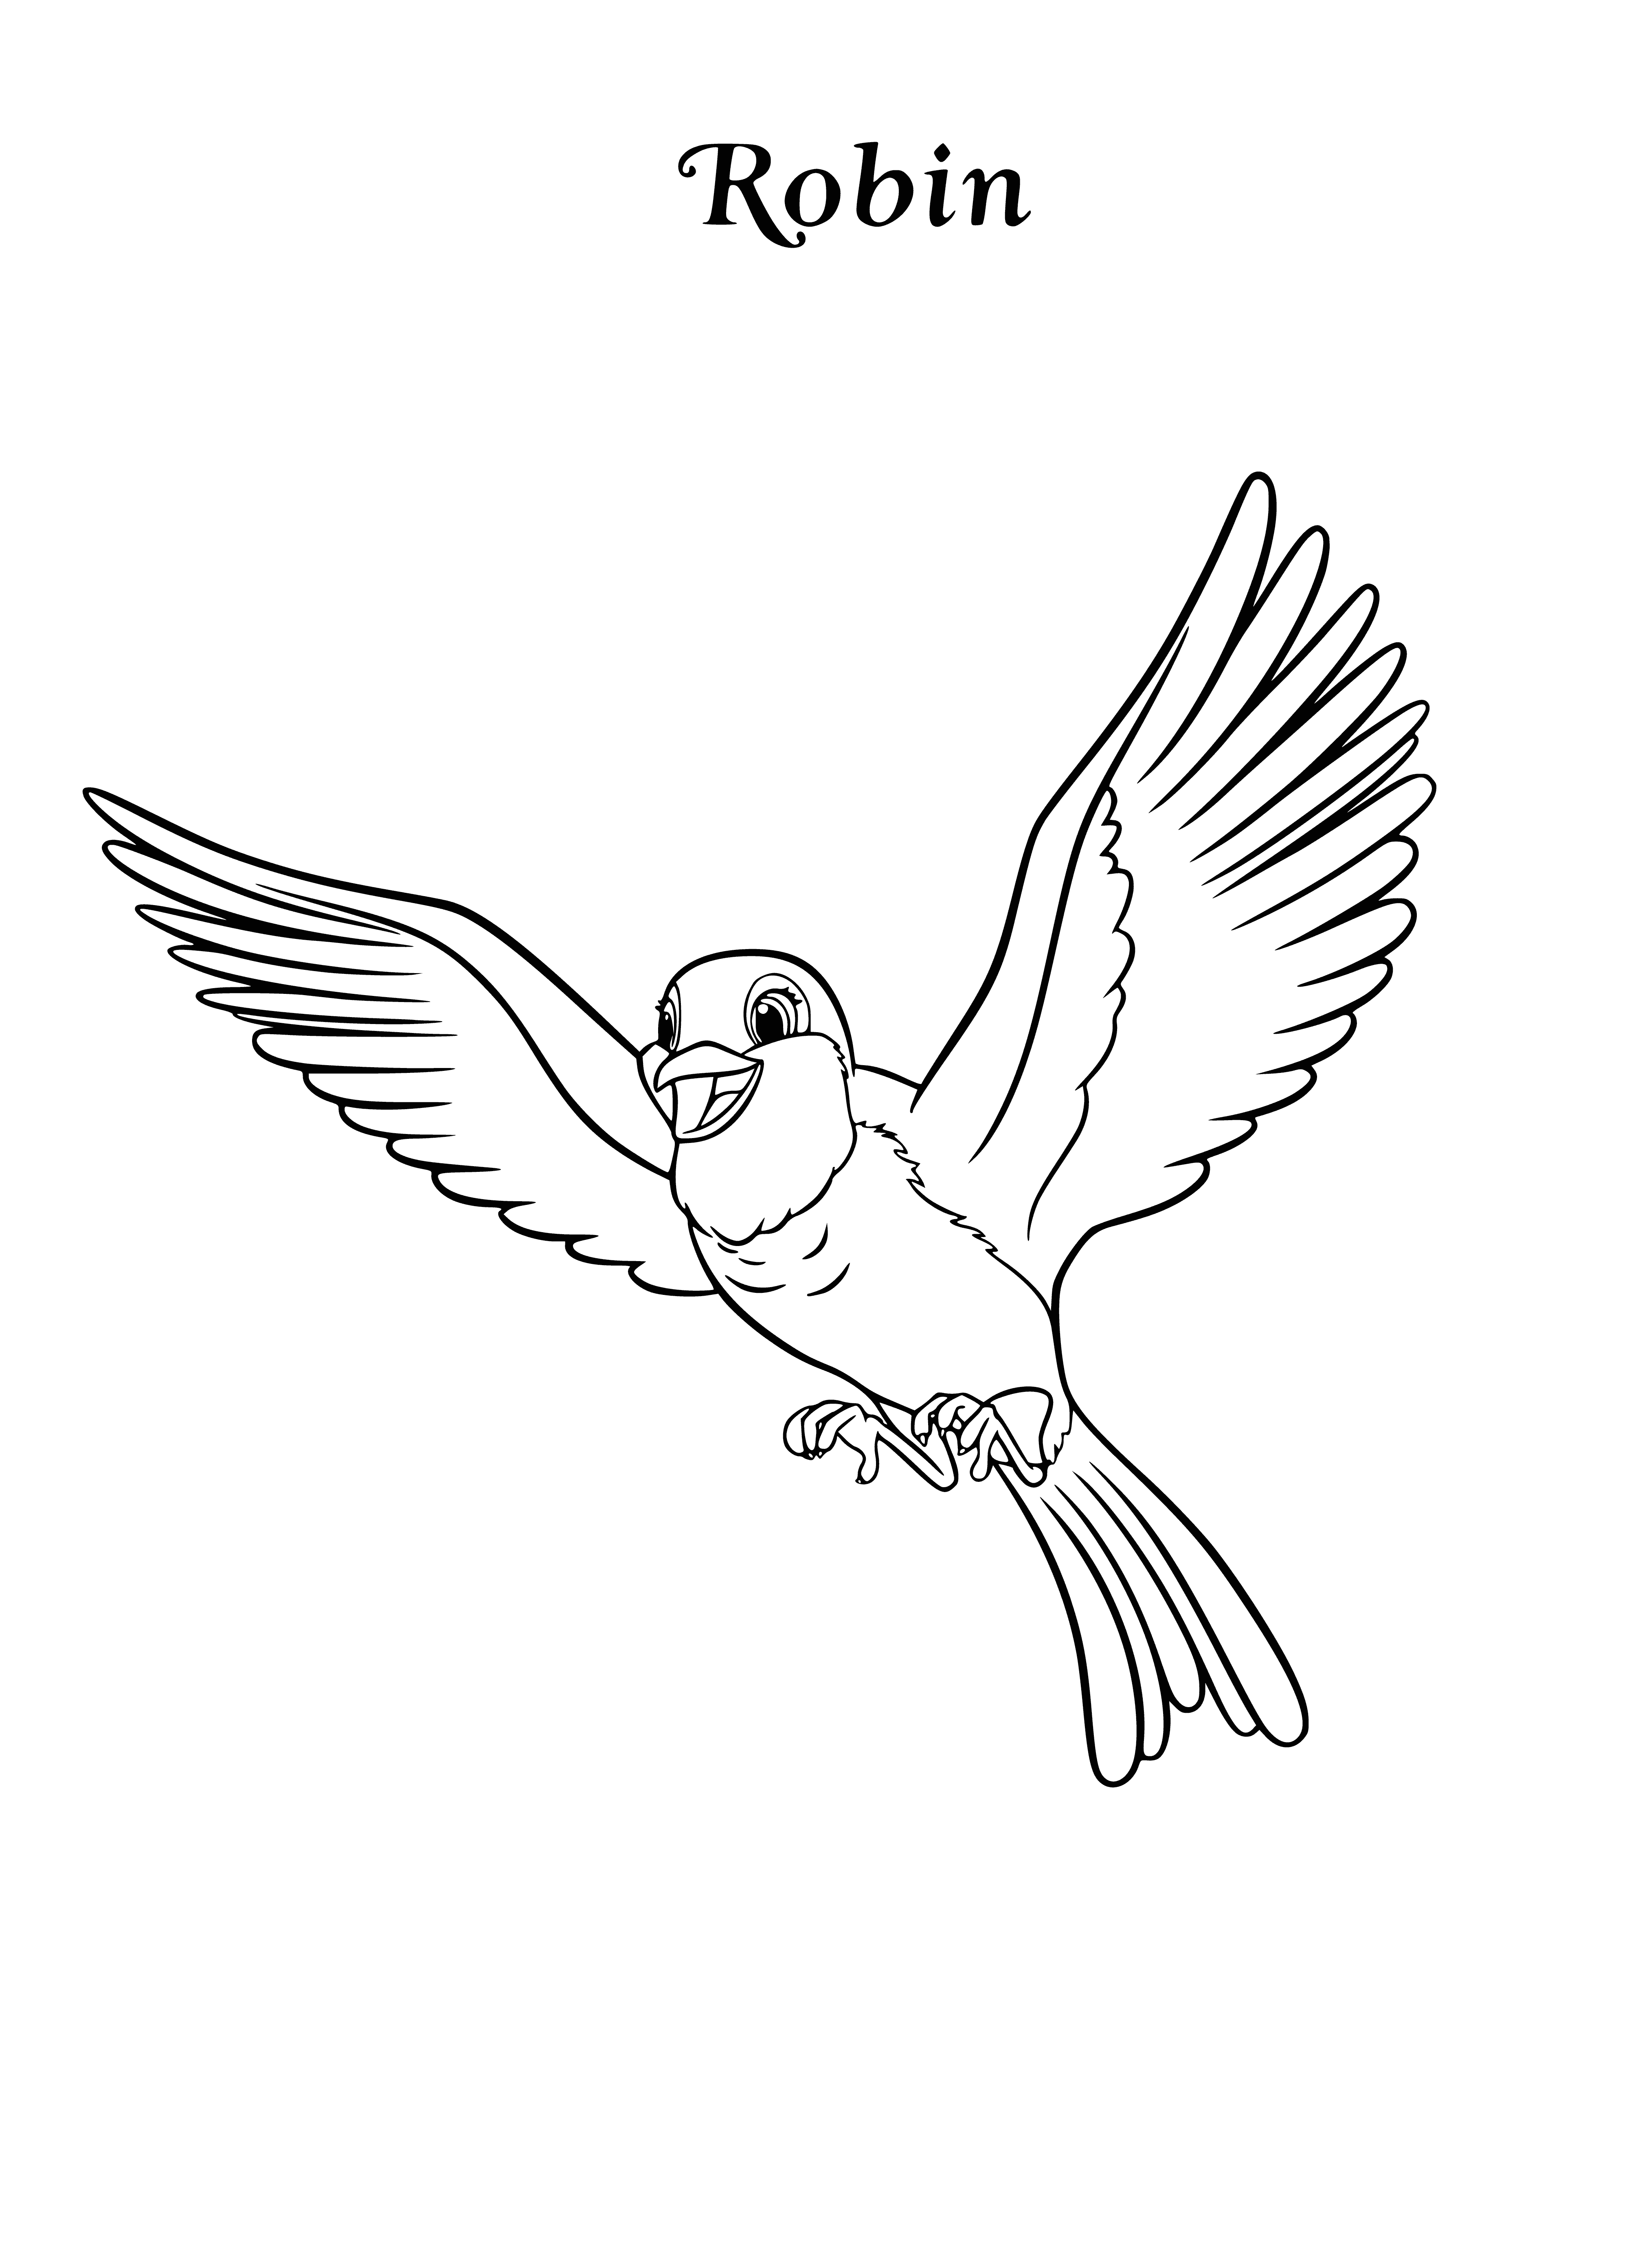 coloring page: A small yellow bird with a red belly & crest perches calmly on a green branch, pondering something off to the side.